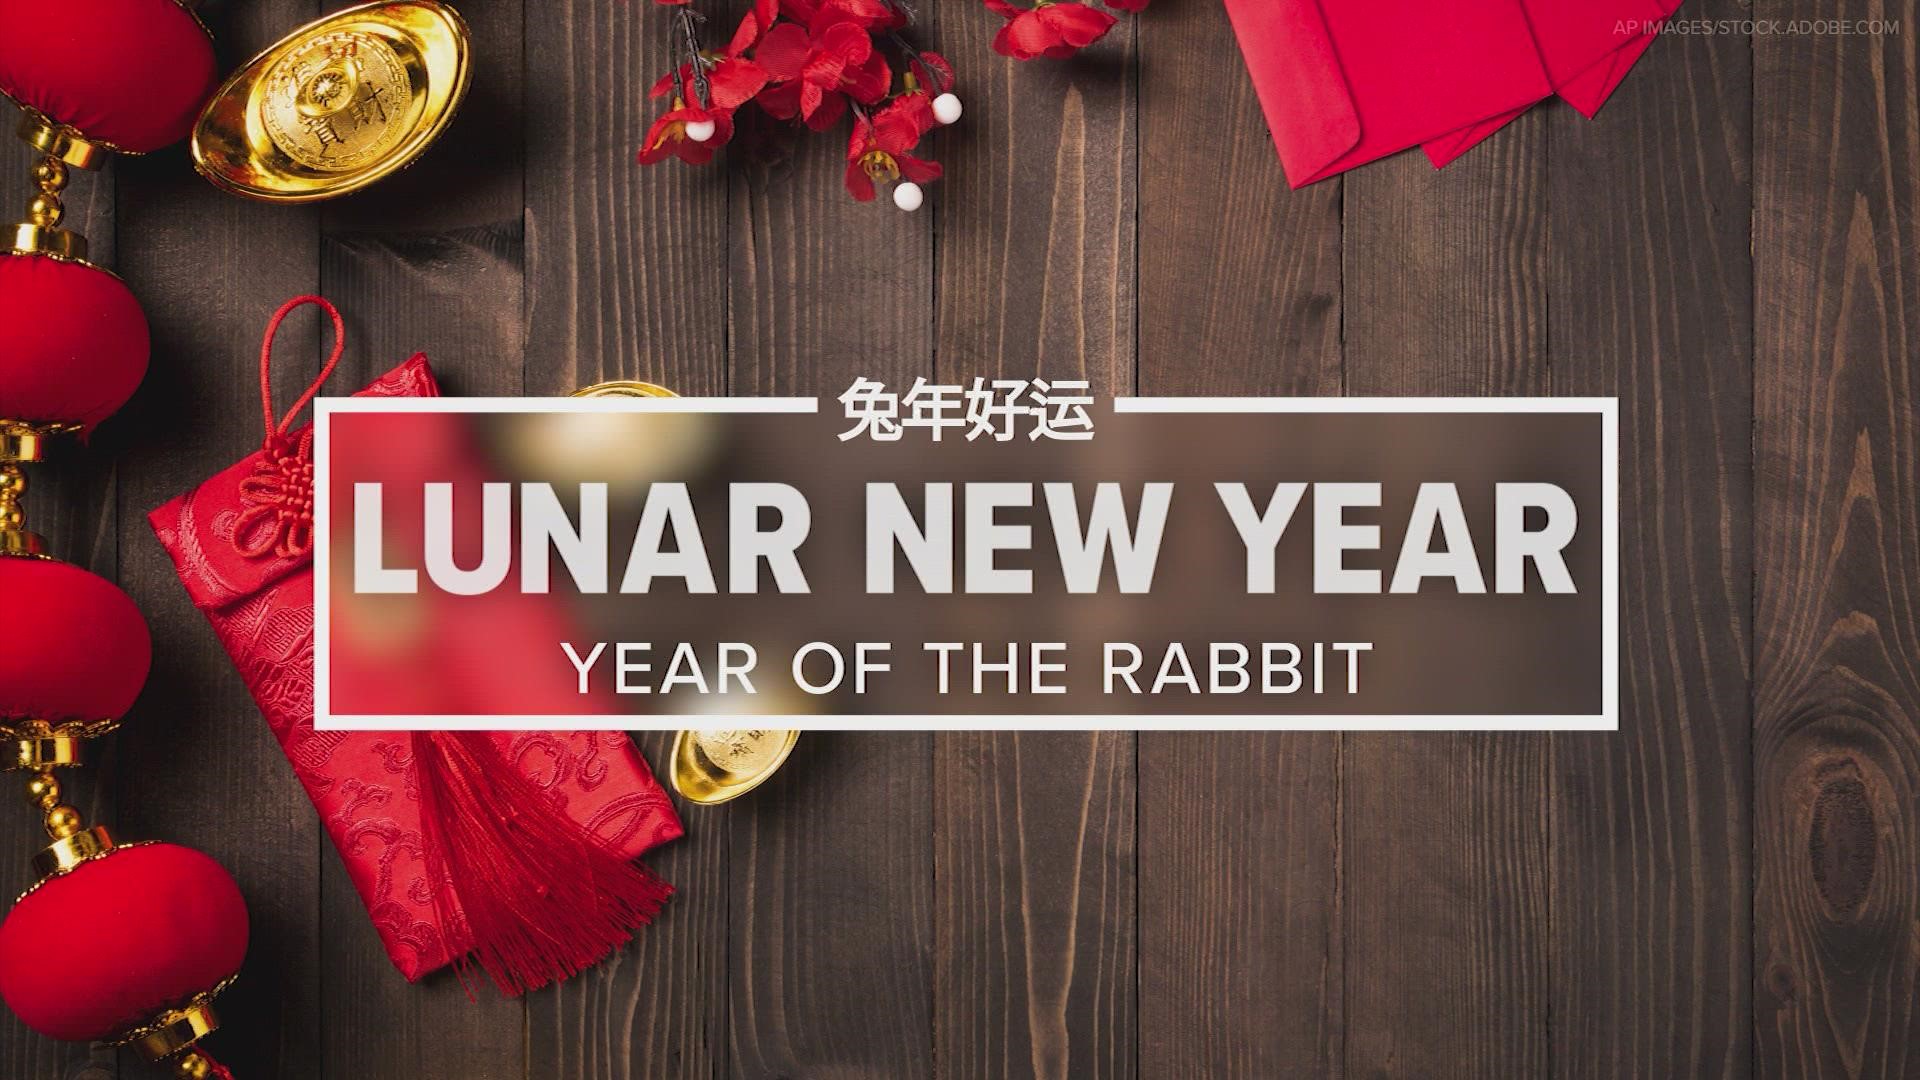 Celebrate the Lunar New Year with Pokémon GO's 2023 Lunar New Year event!